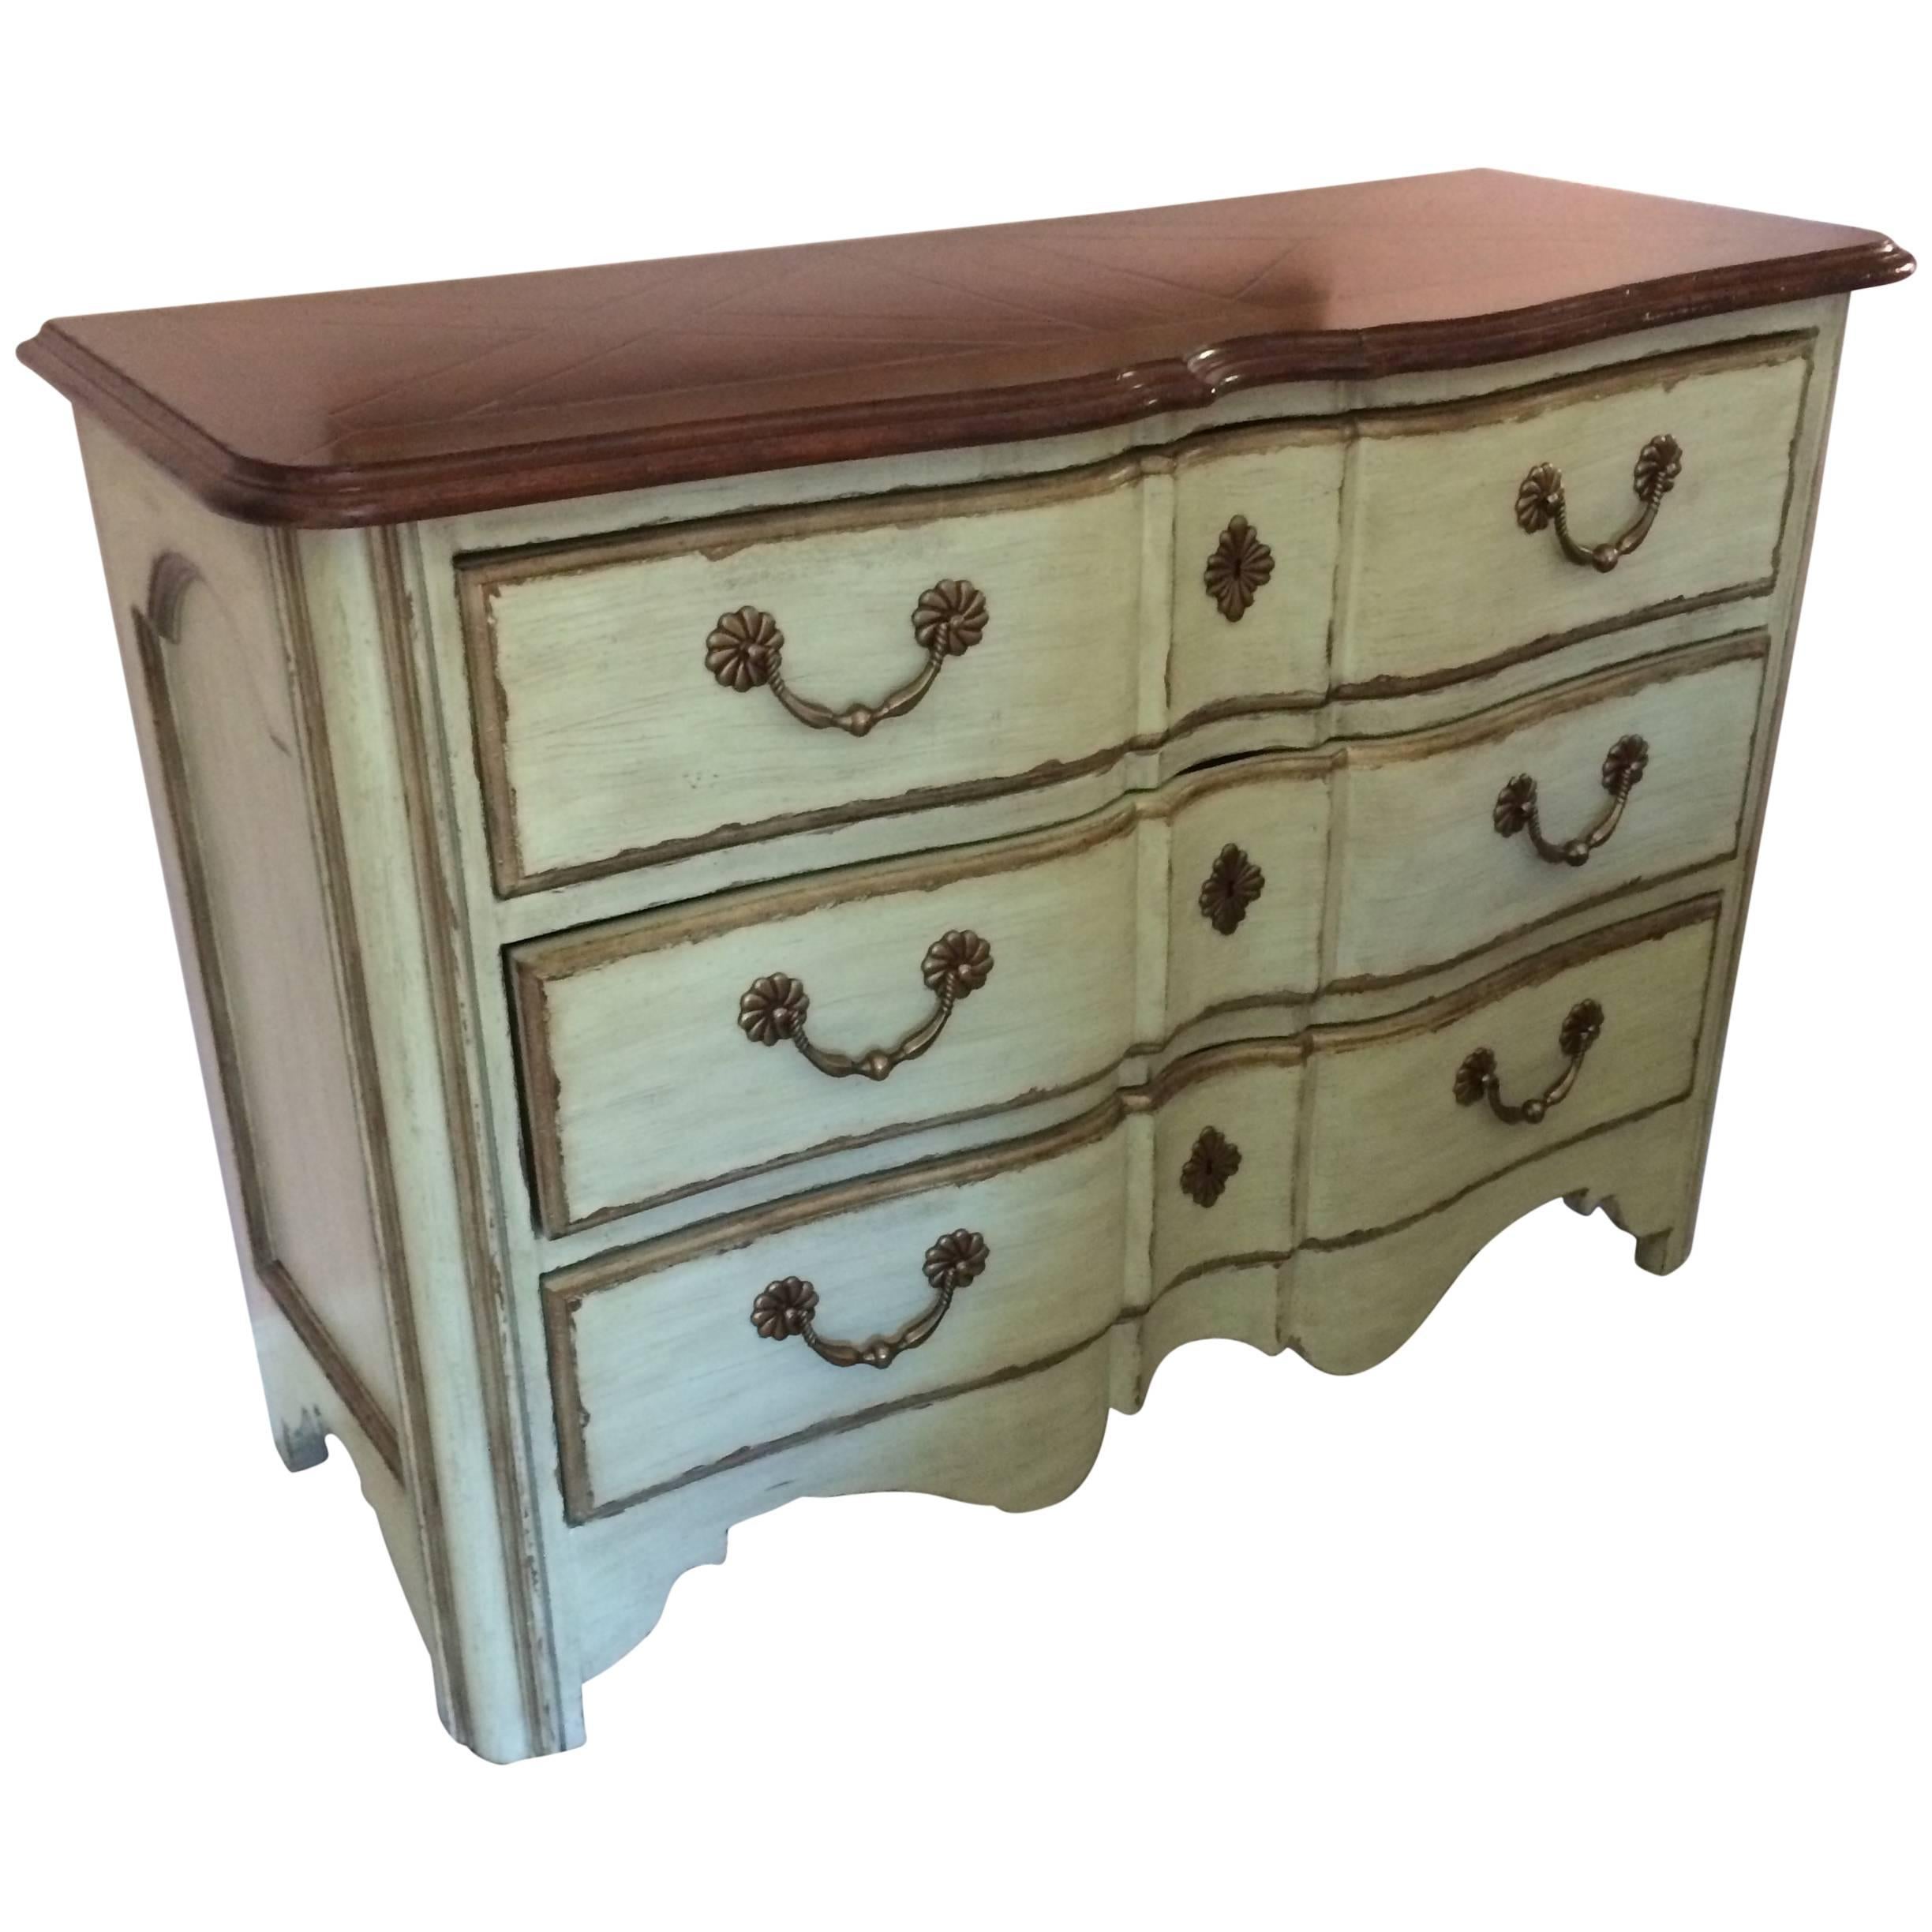 Handsome Drexel Heritage Chest of Drawers